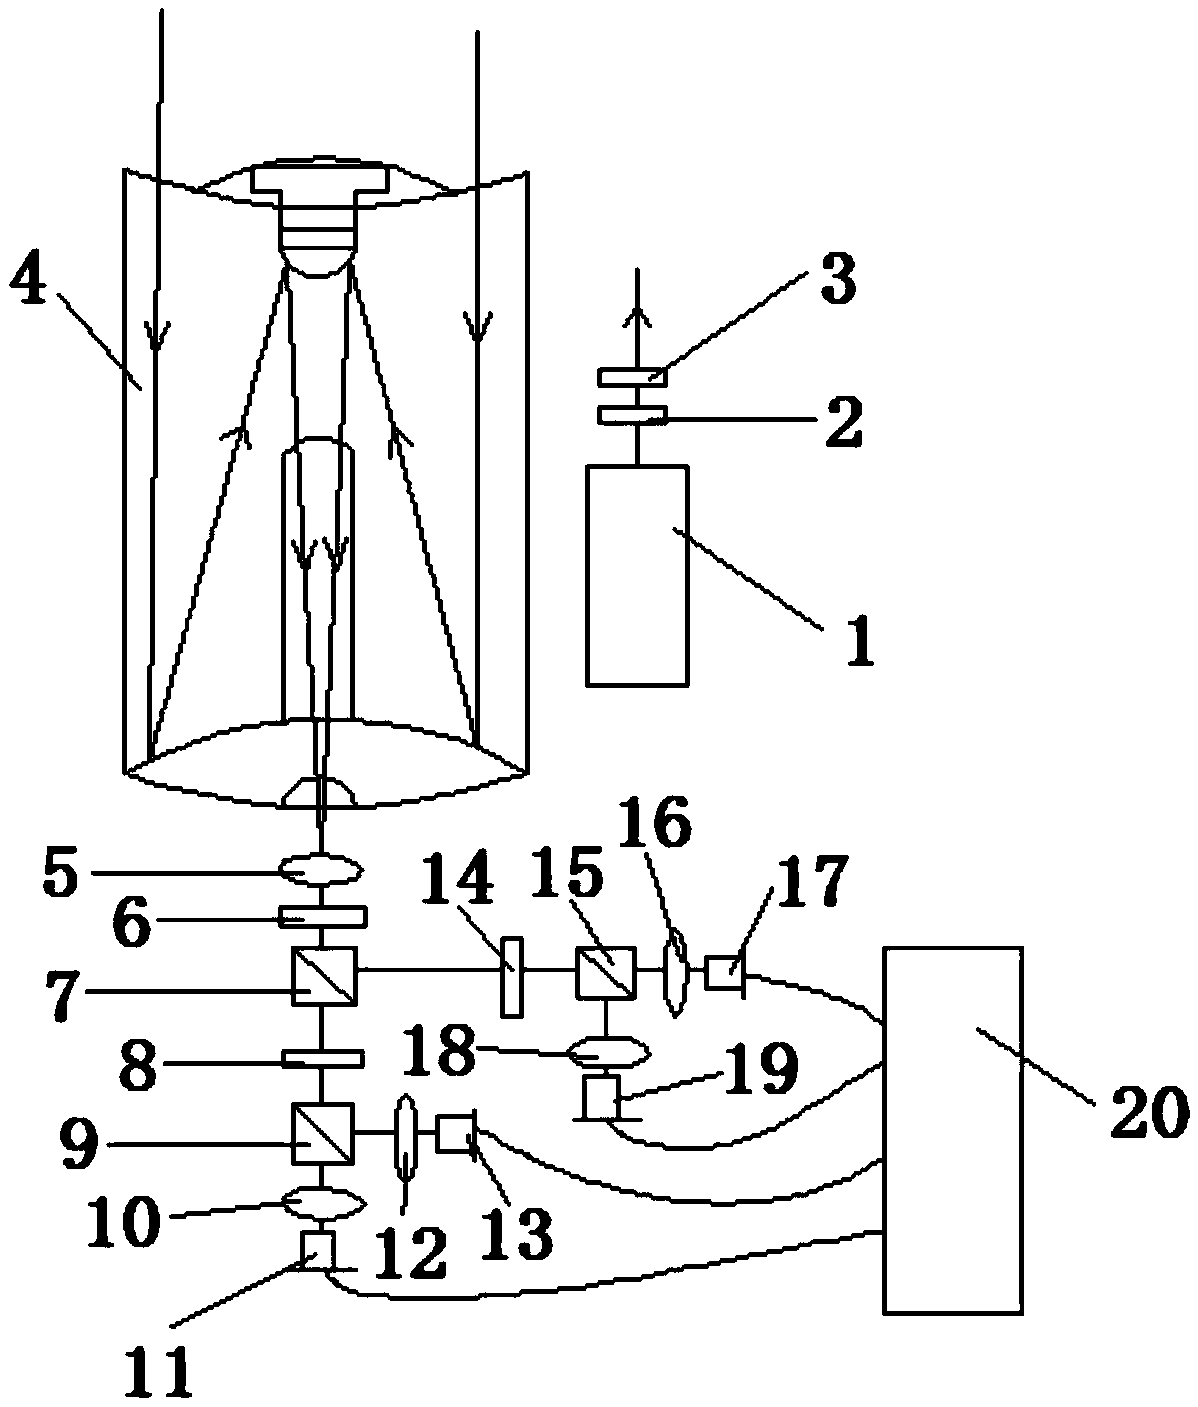 Full-polarization laser radar system used for detecting shapes of particles and detection method of full-polarization laser radar system